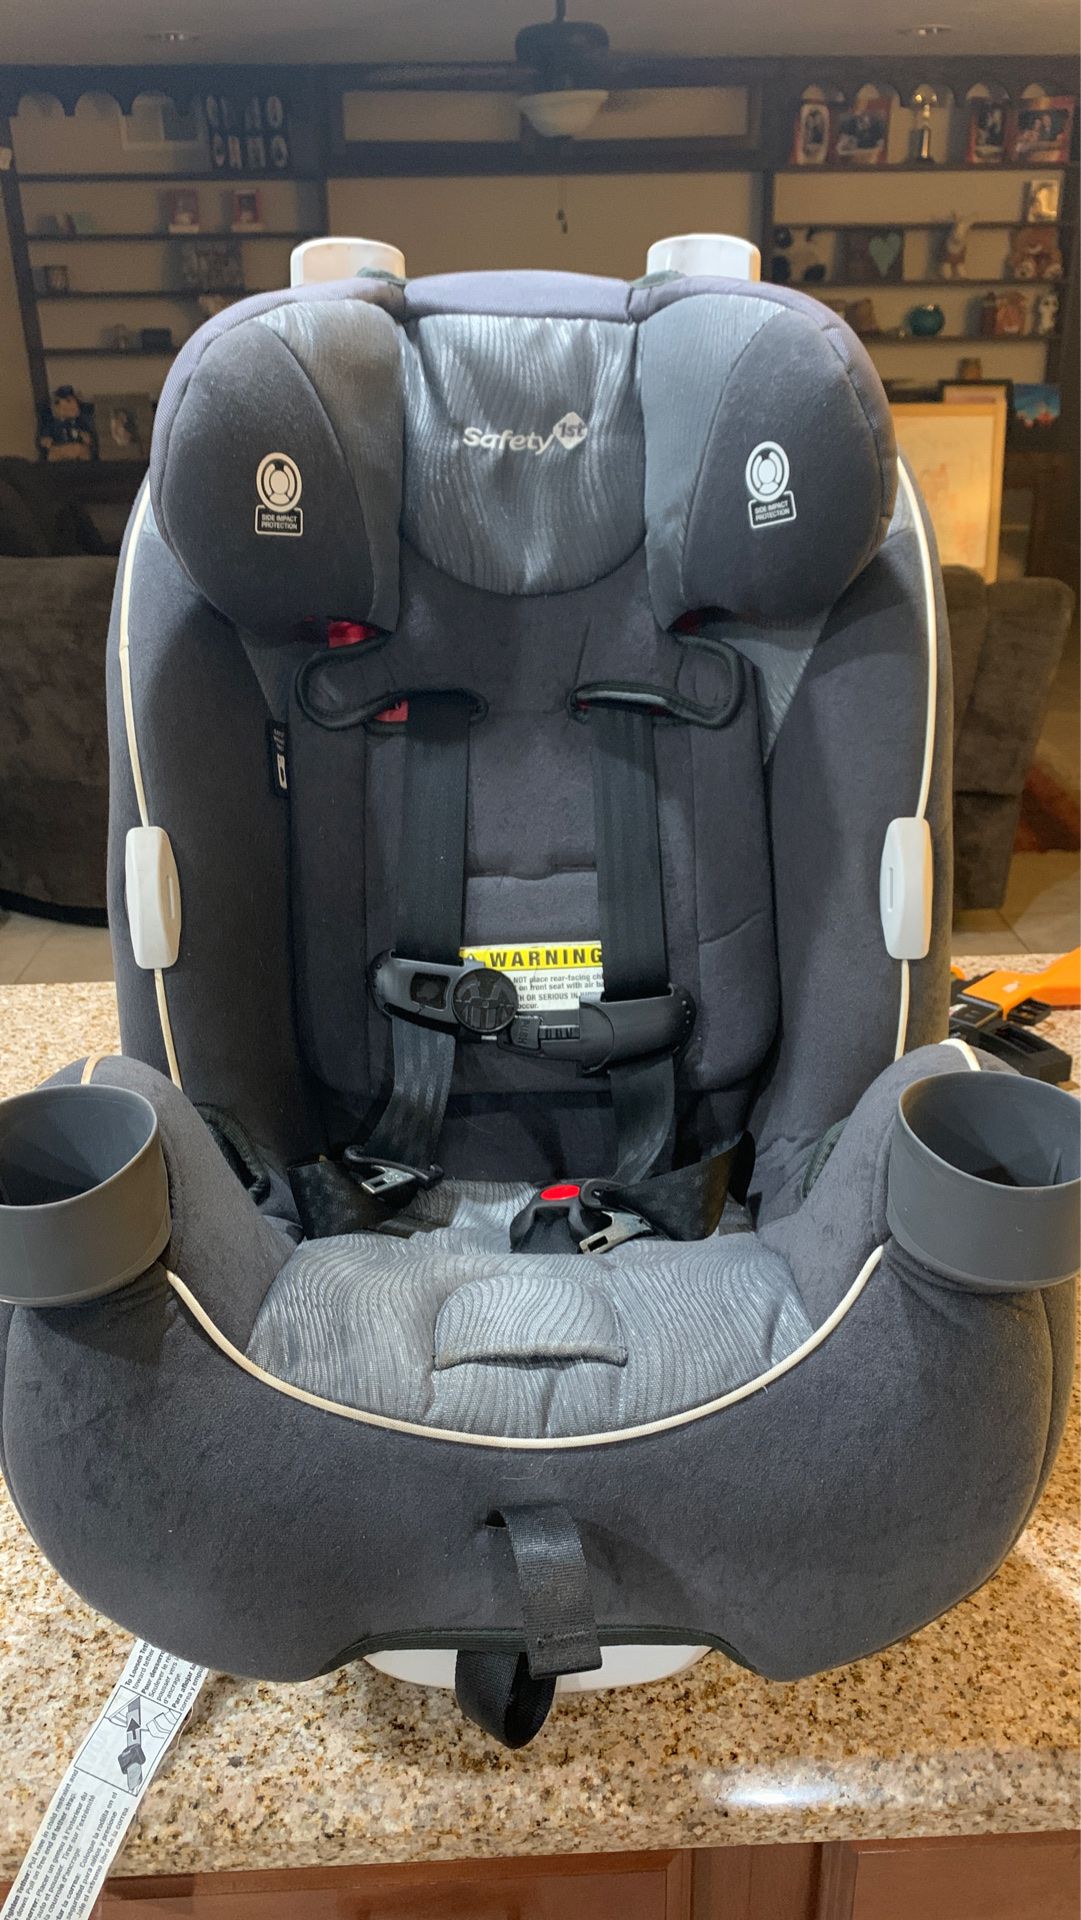 Safety first car seat